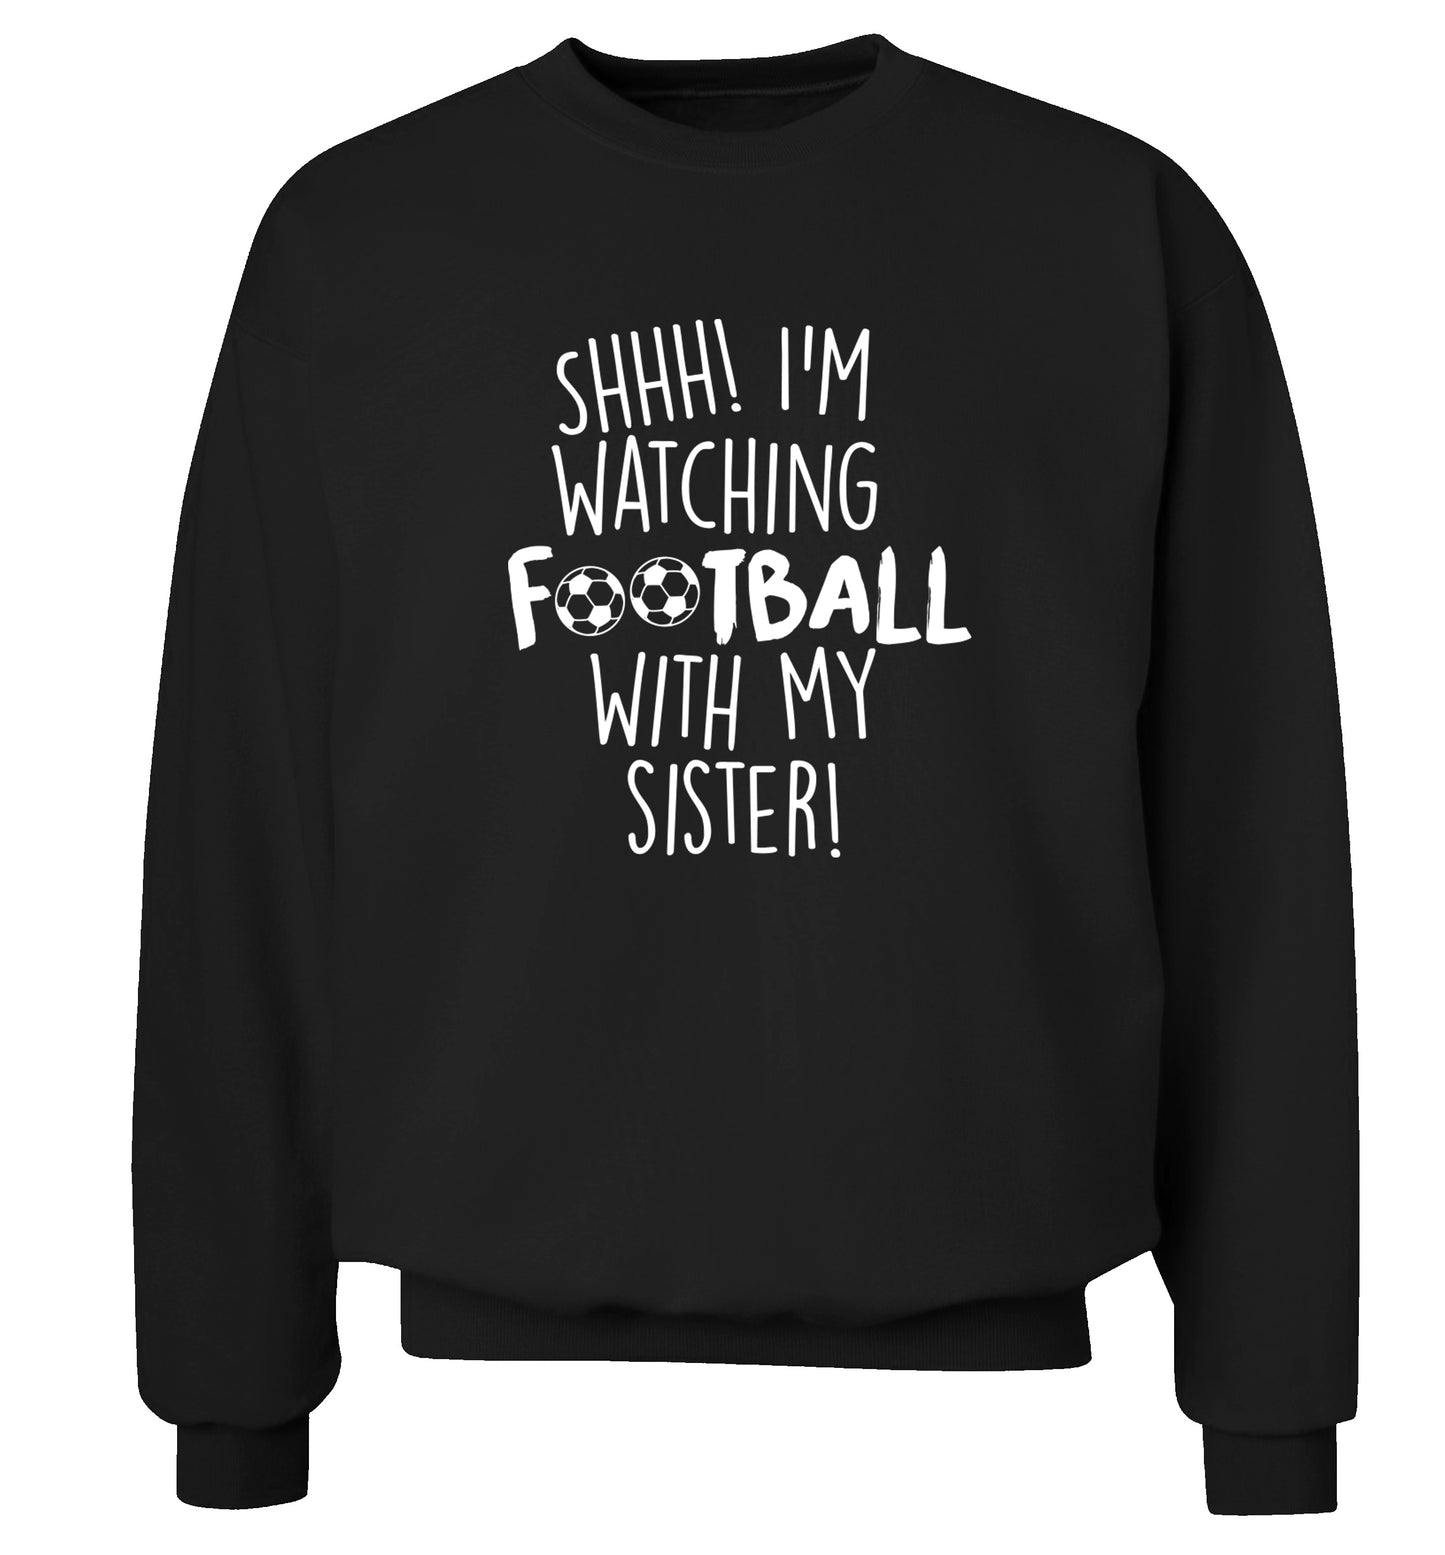 Shhh I'm watching football with my sister Adult's unisexblack Sweater 2XL